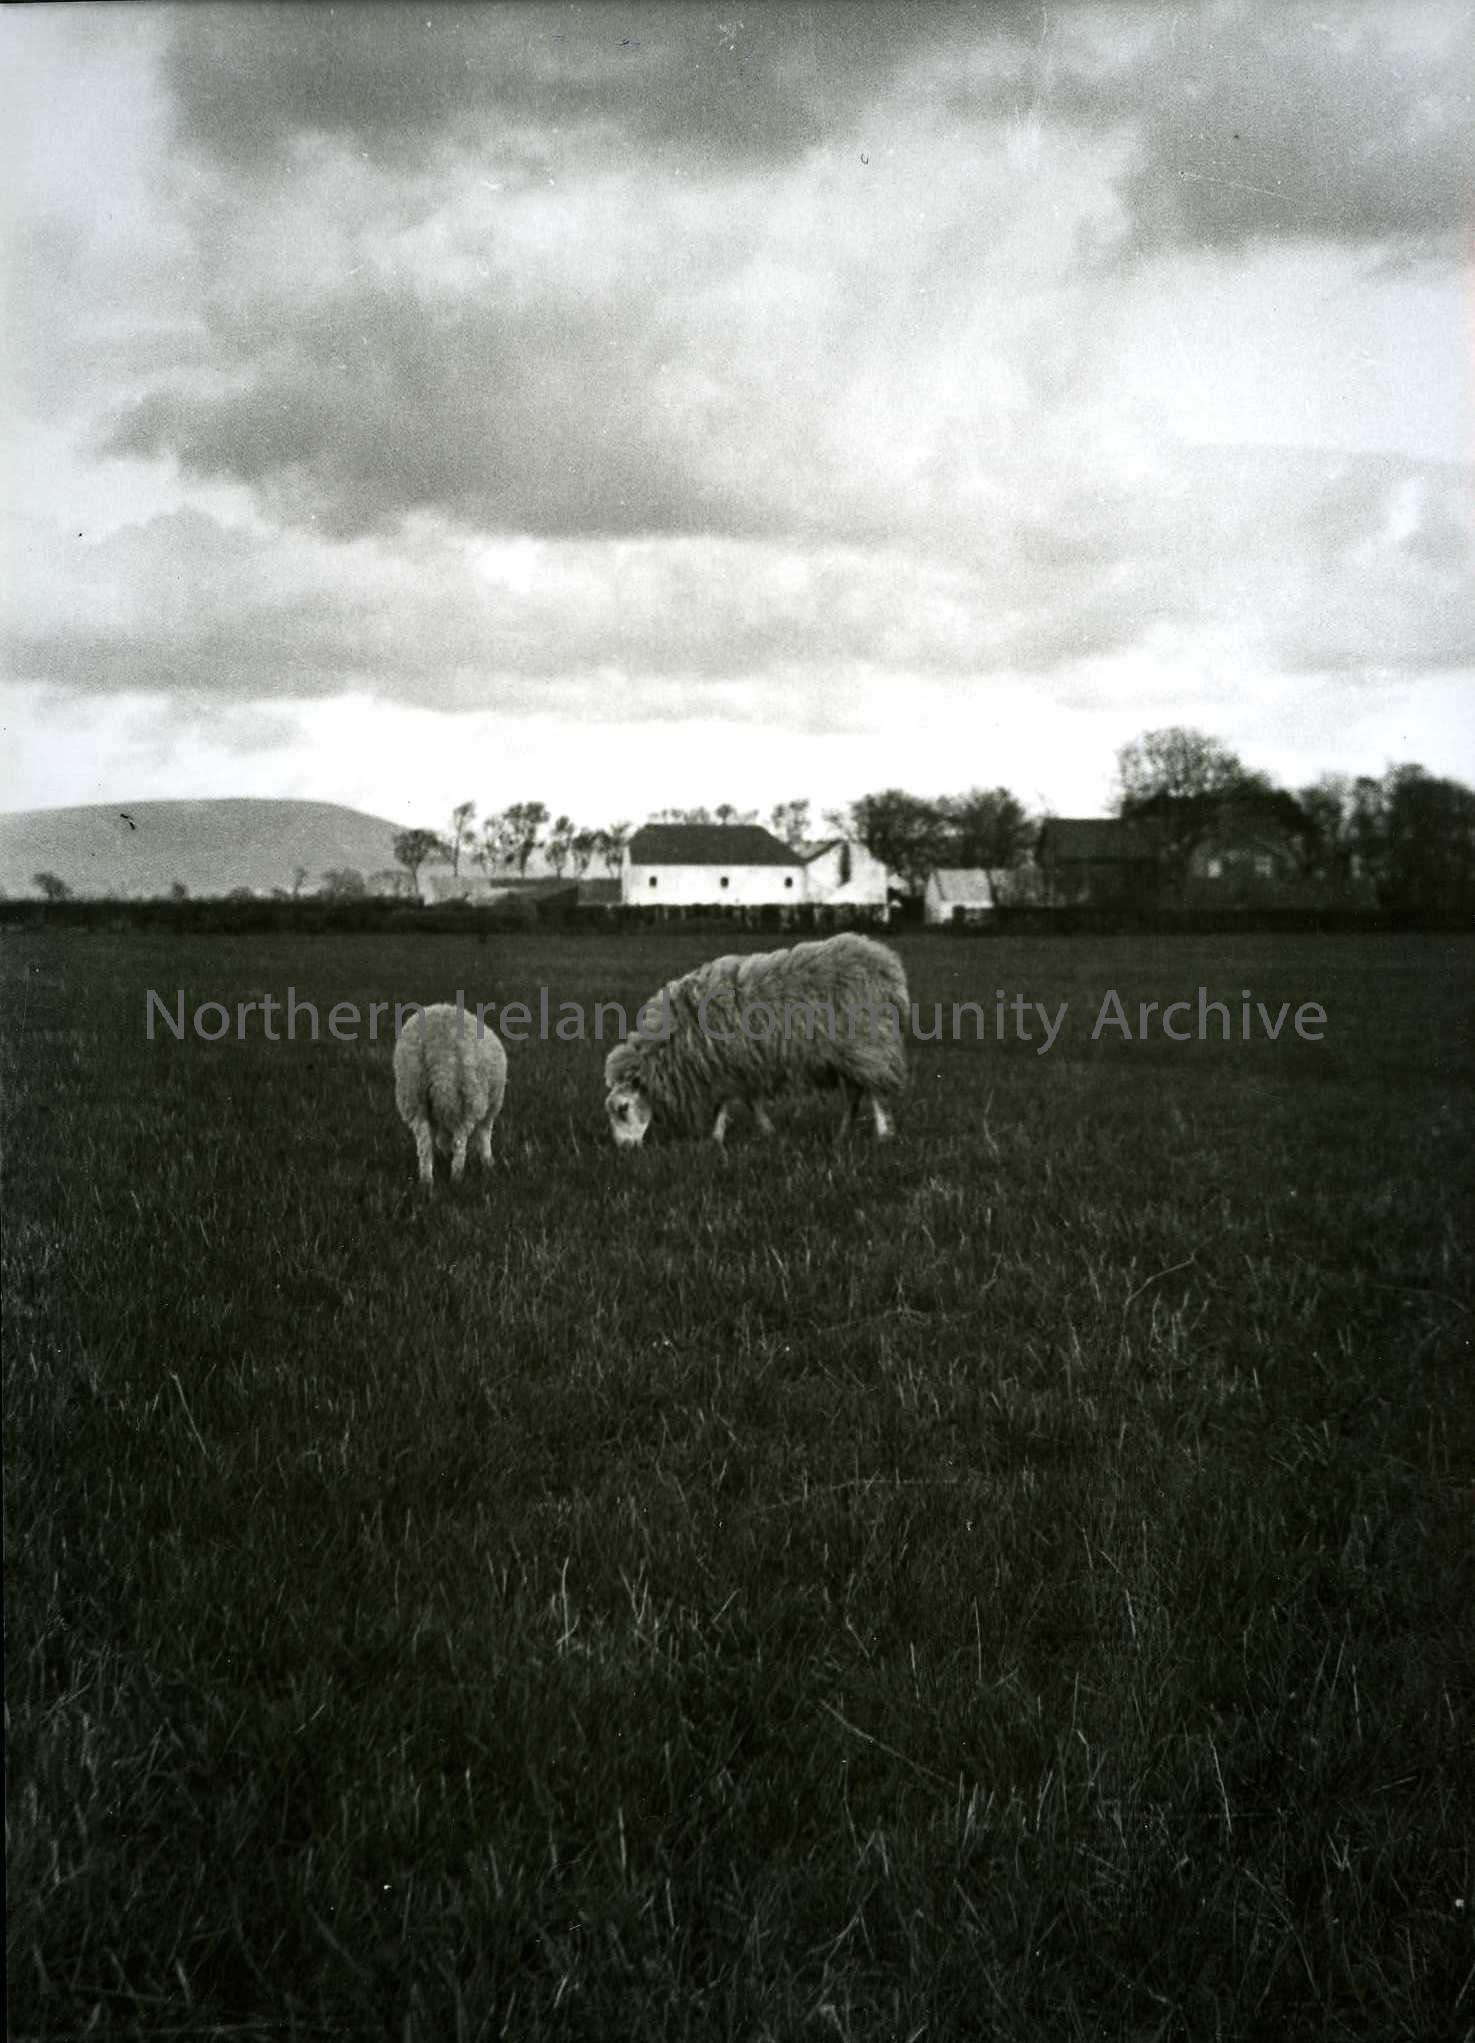 Printed black and white photograph – Sheep in a field with houses visible behind.